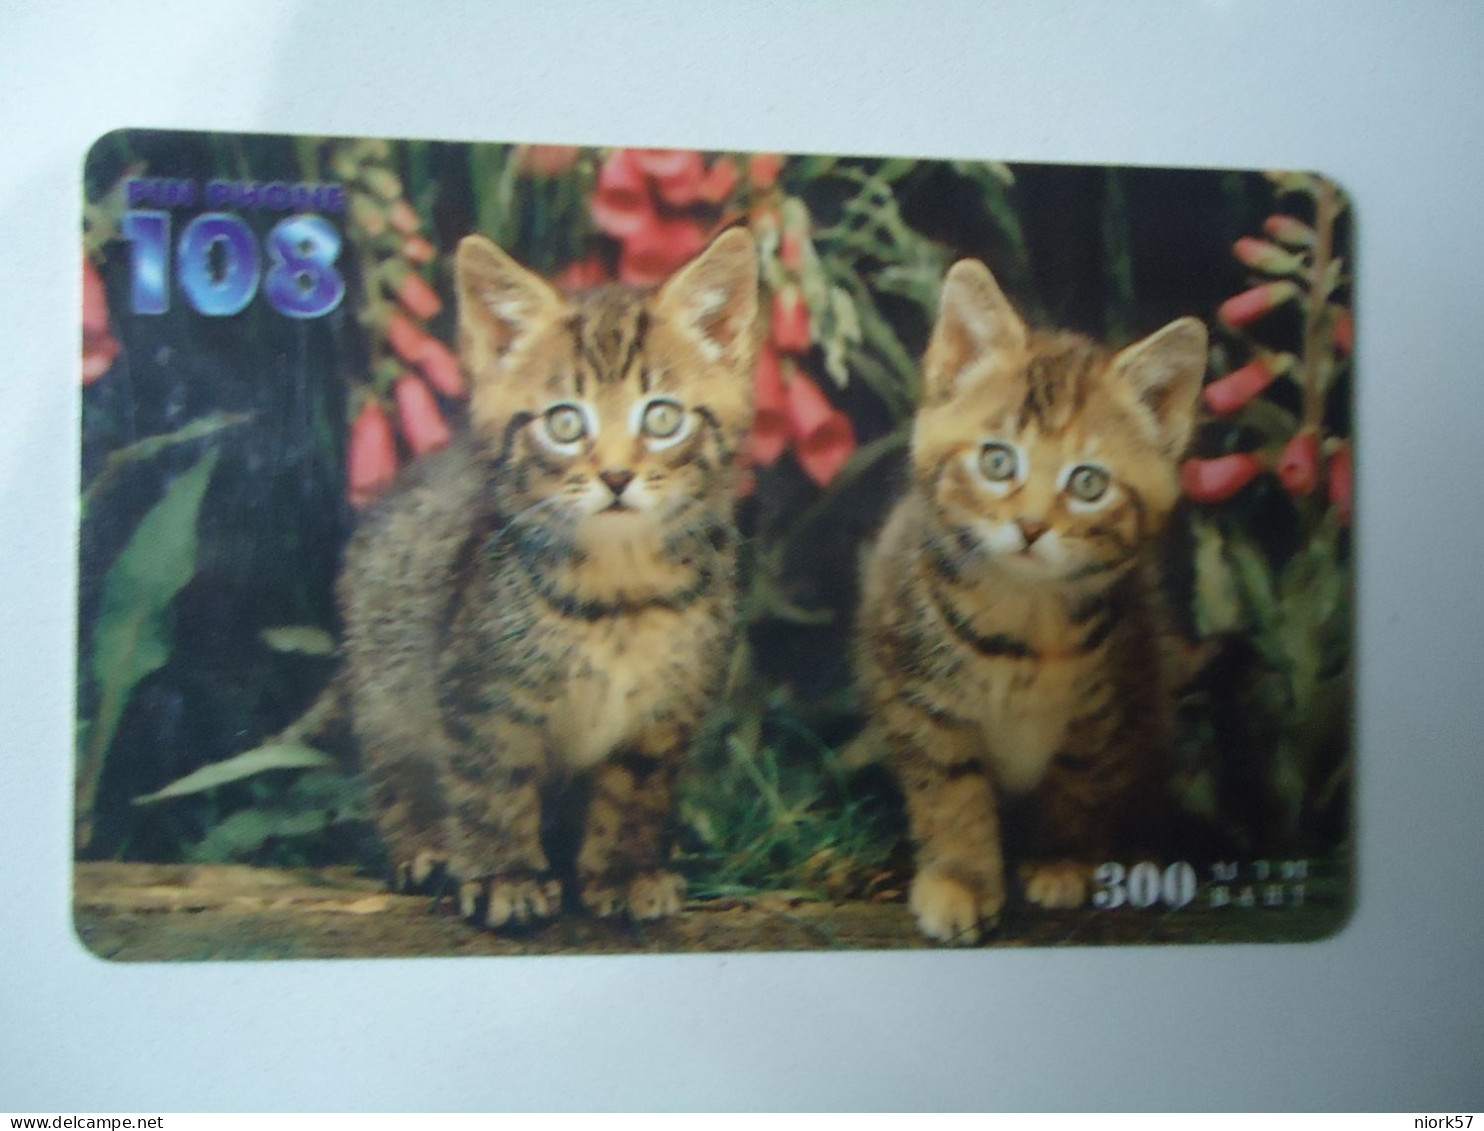 THAILAND USED  CARDS PIN 108 FLOWERS TREE  CATS UNITS 300 - Cats